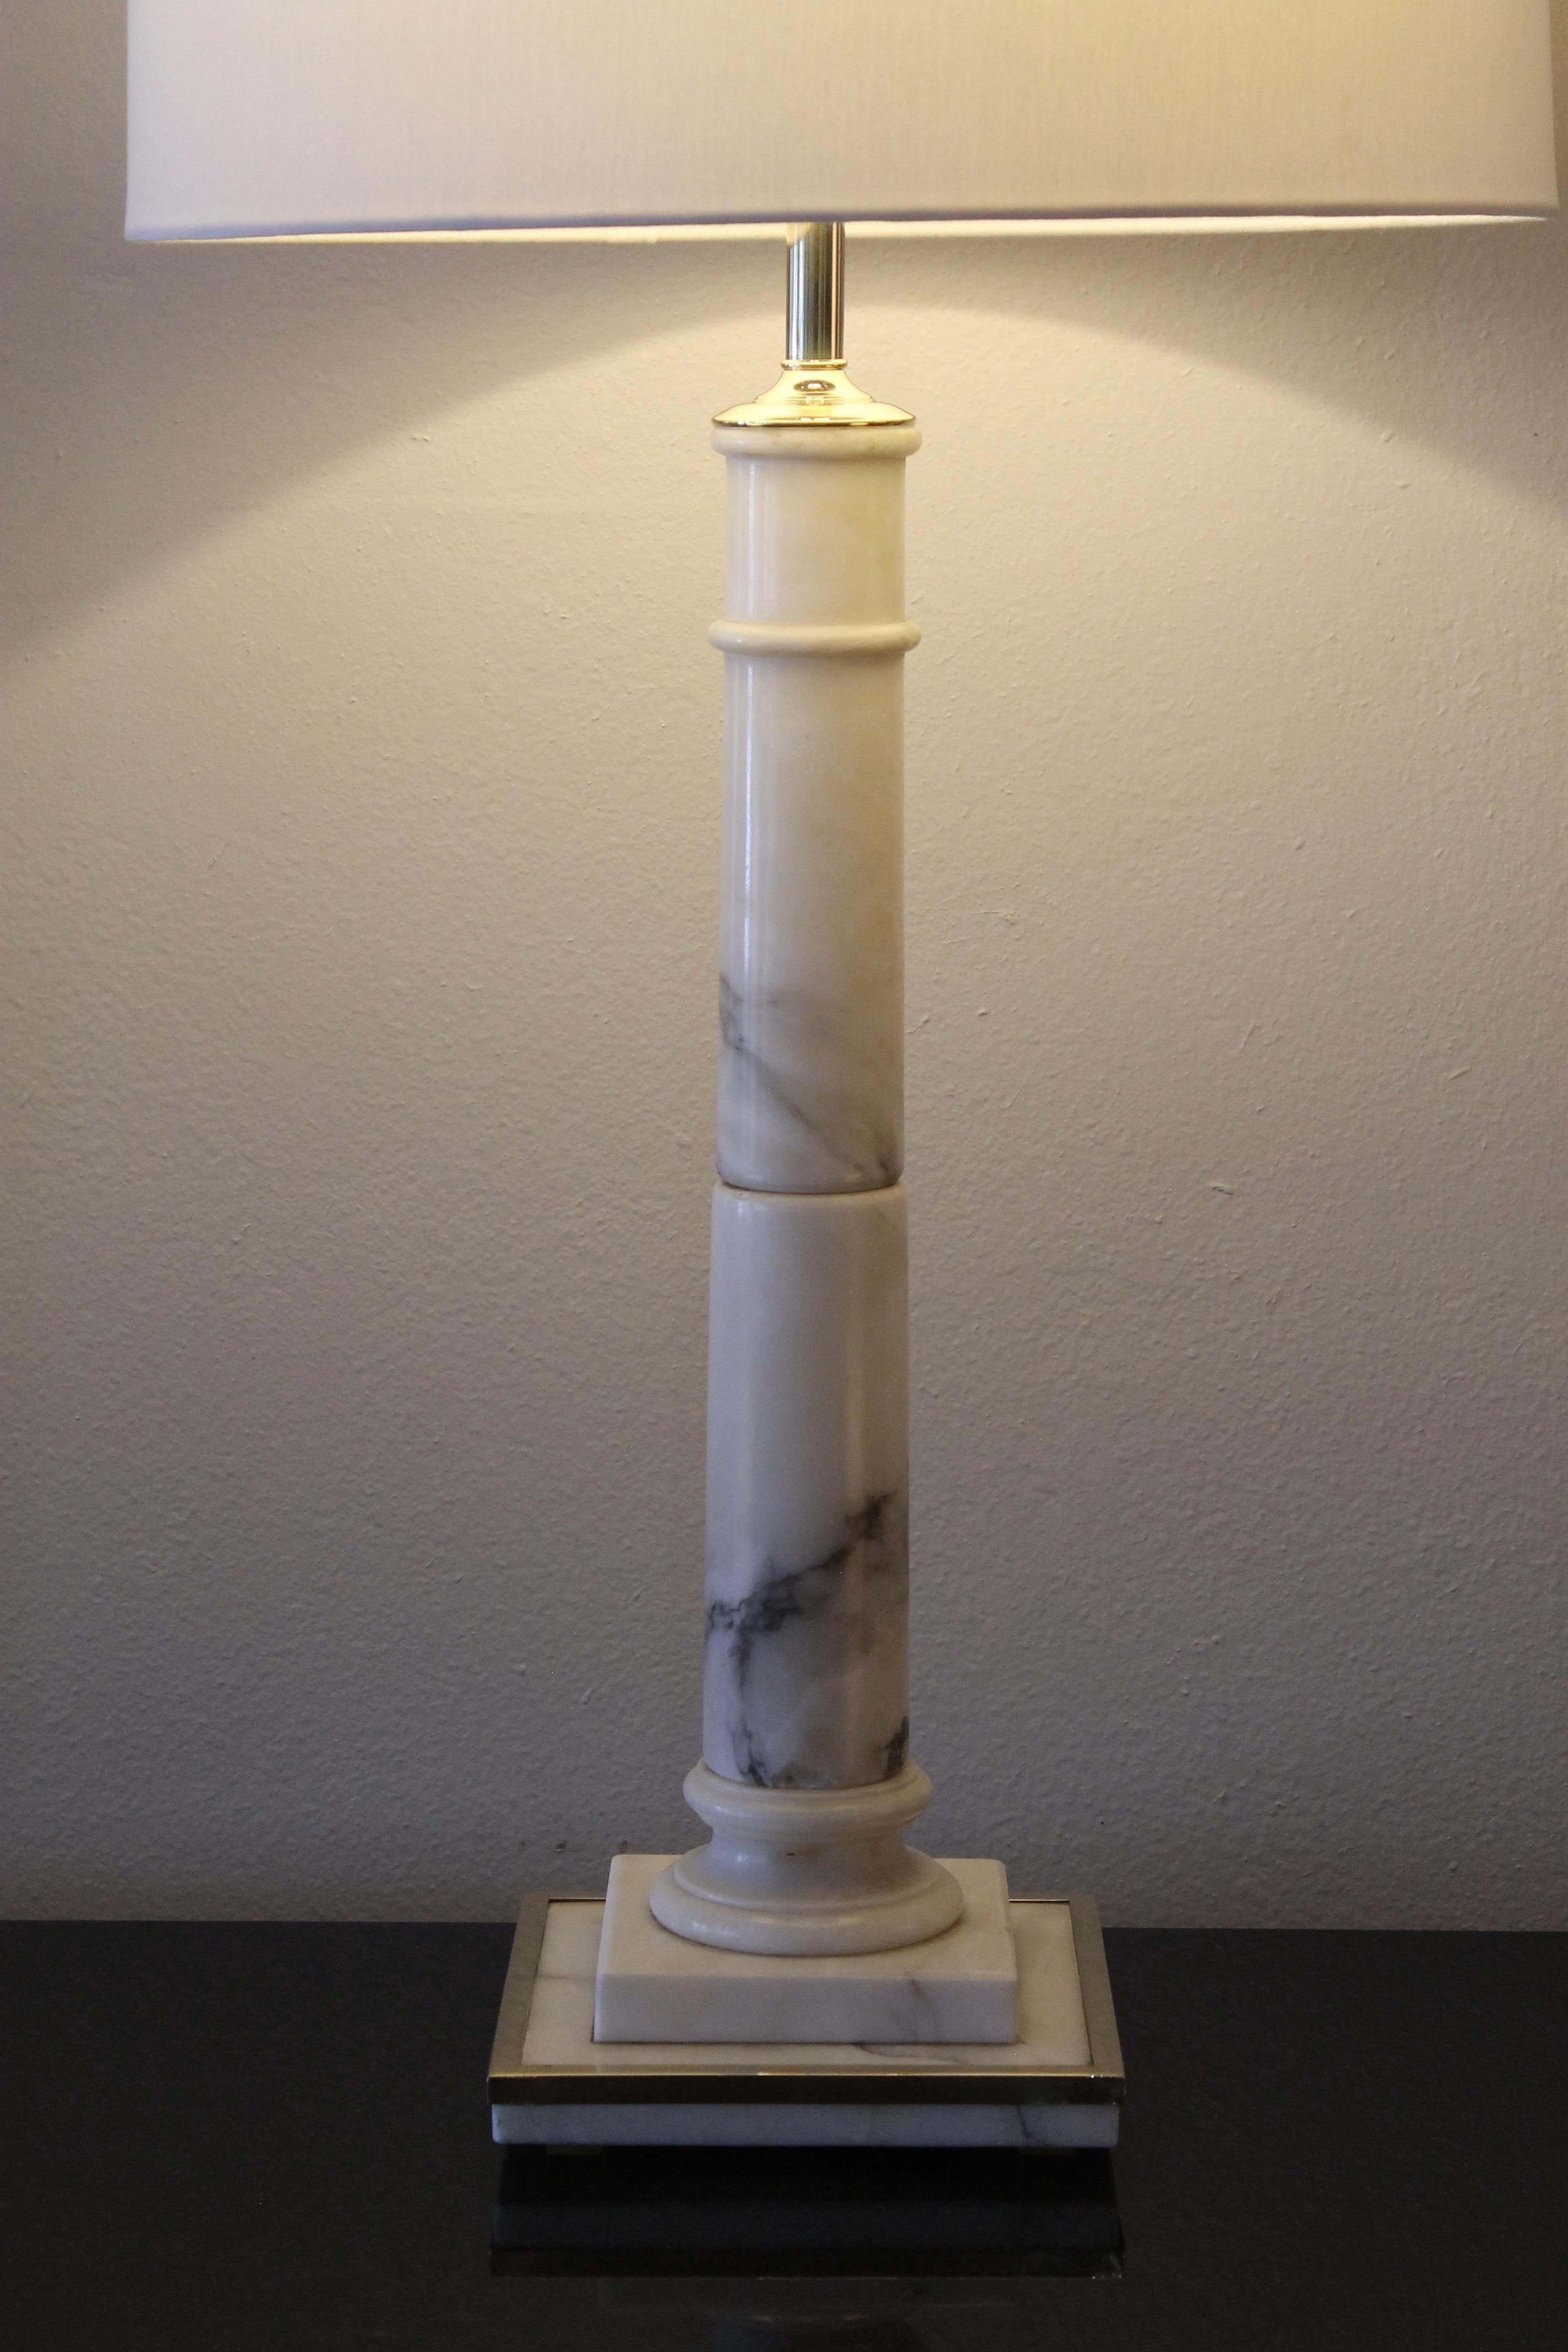 Marble lamp with brass outline on base for I. Magnin & Company, San Francisco, CA. Lamp has been professionally rewired for 3-way light bulbs. Lamp measures 26.5